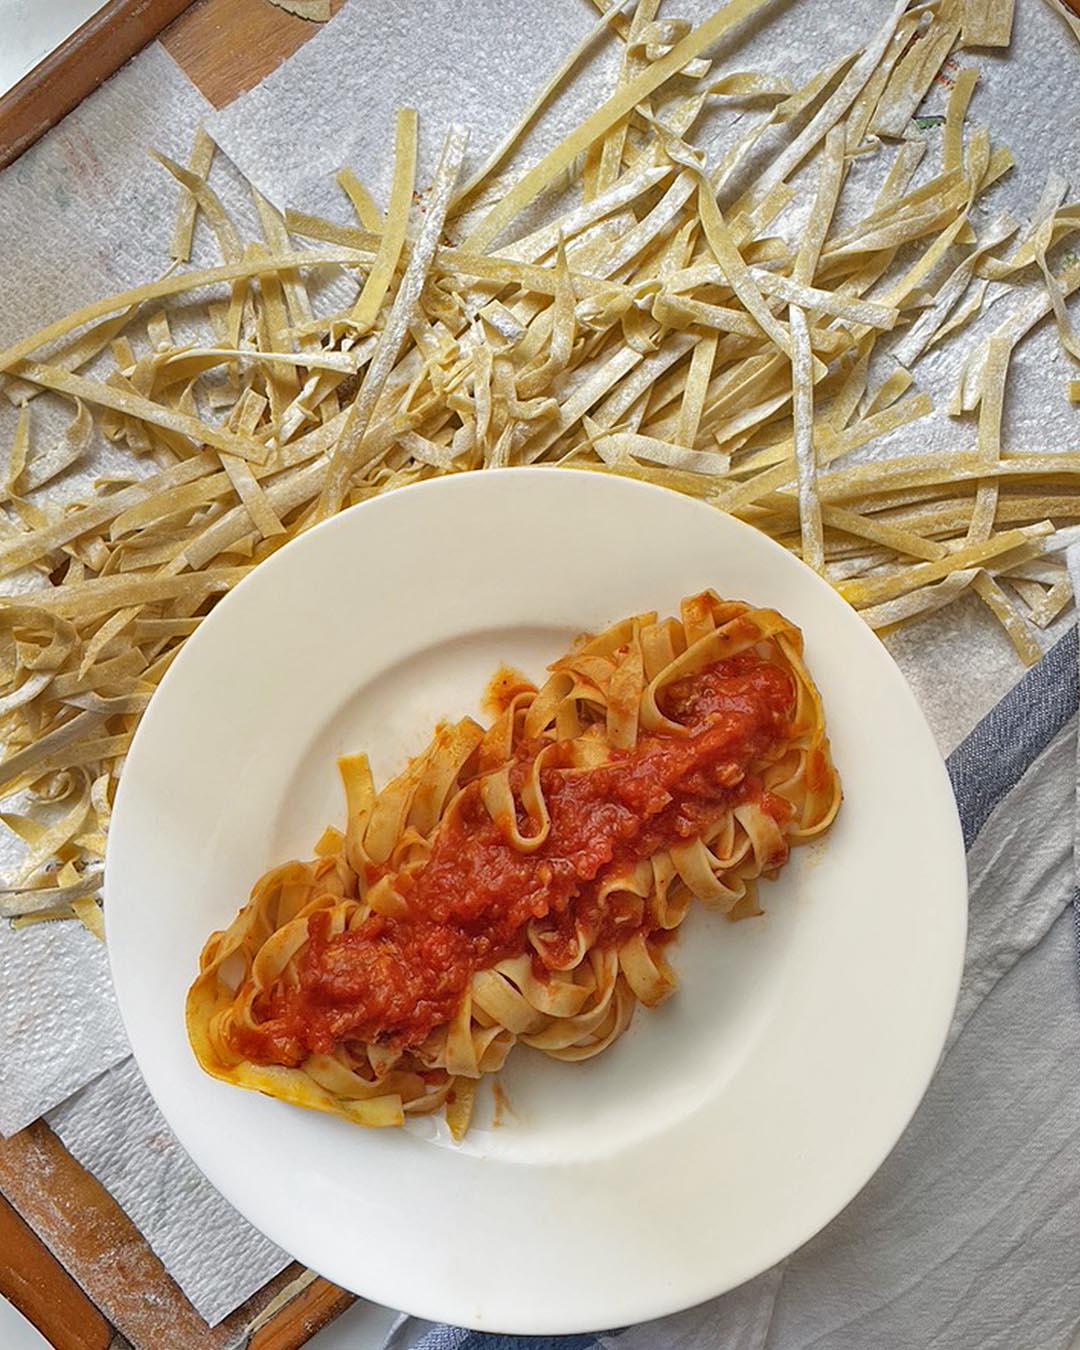 homemade pasta from the scratch